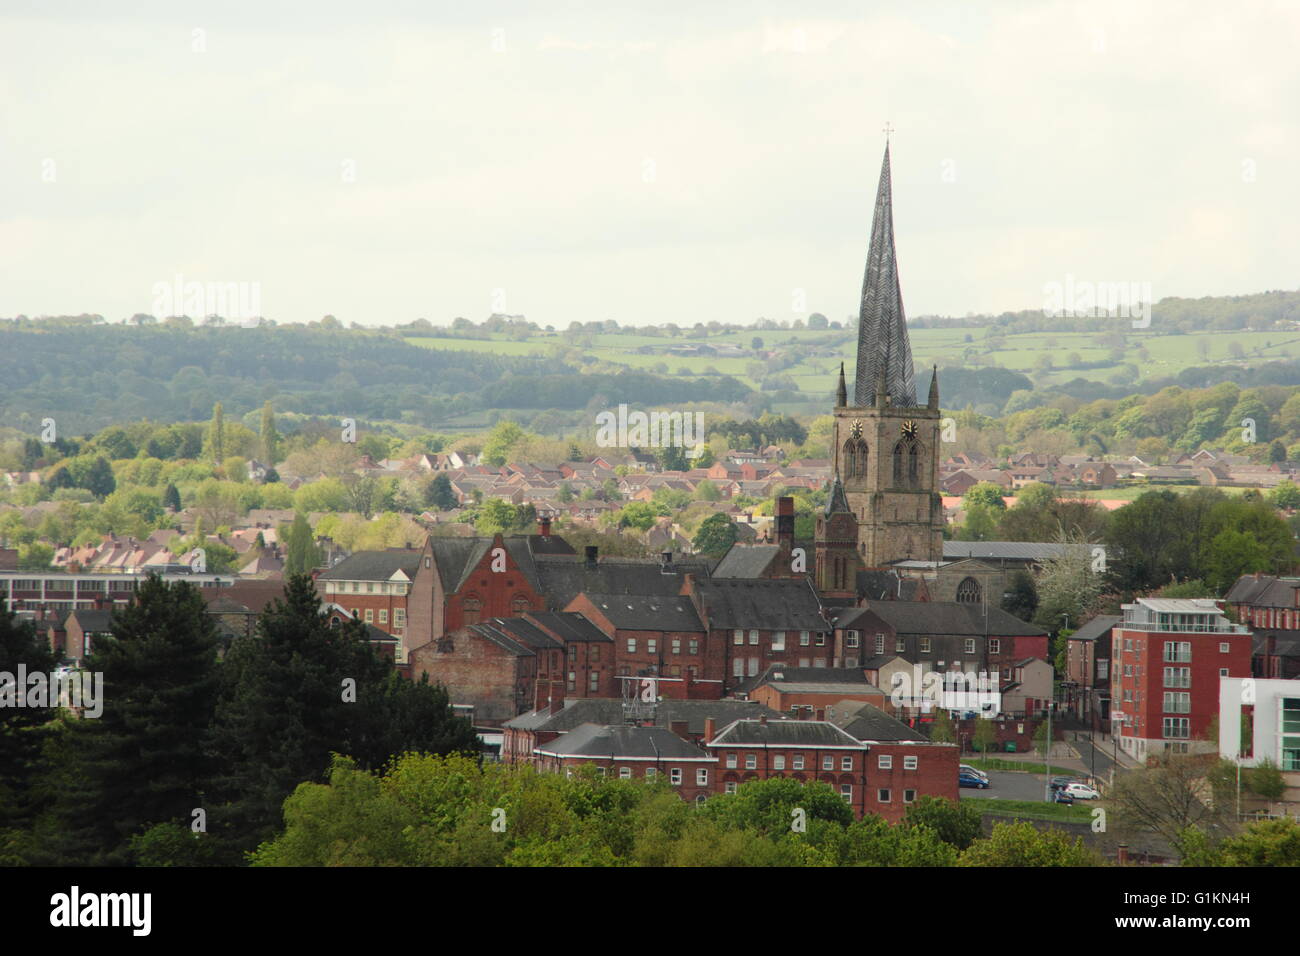 Skyline of Chesterfield town centre dominated by the 'twisted spire' of St Mary And All Saints, Chesterfield, Derbyshire England Stock Photo